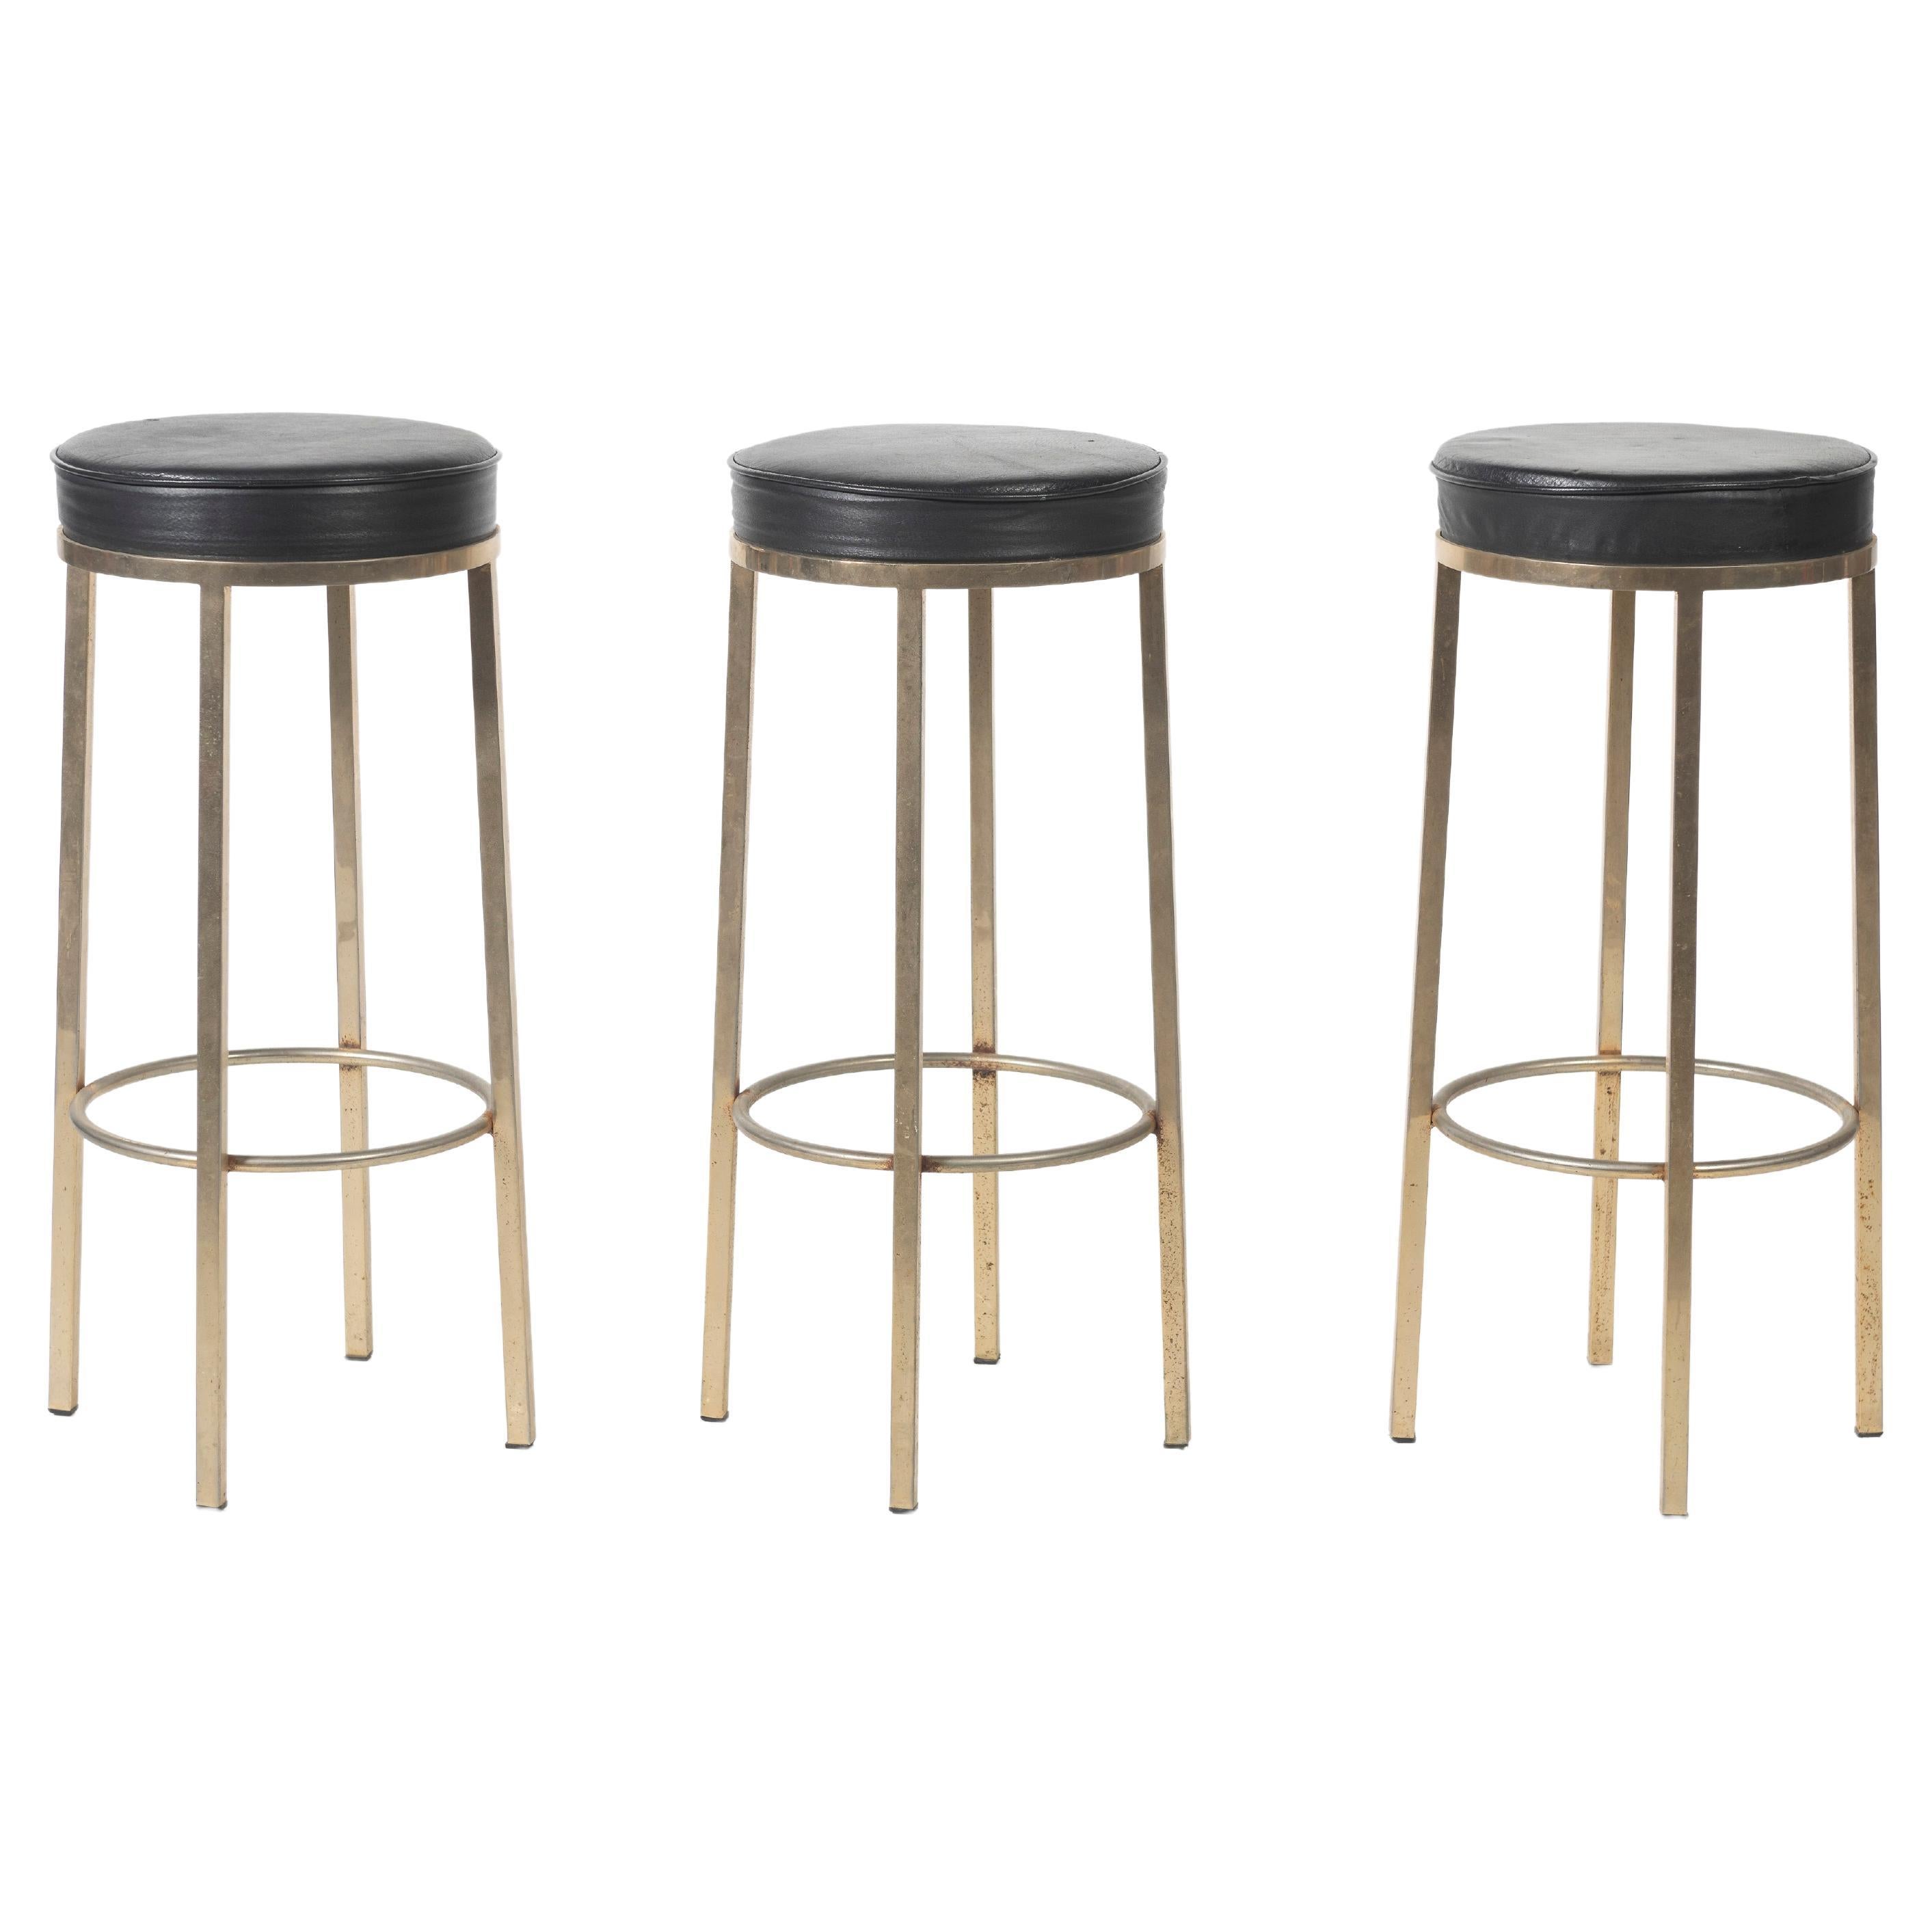 Three Vintage Black Leather Bar Stools with Metal Legs on Circular Support For Sale